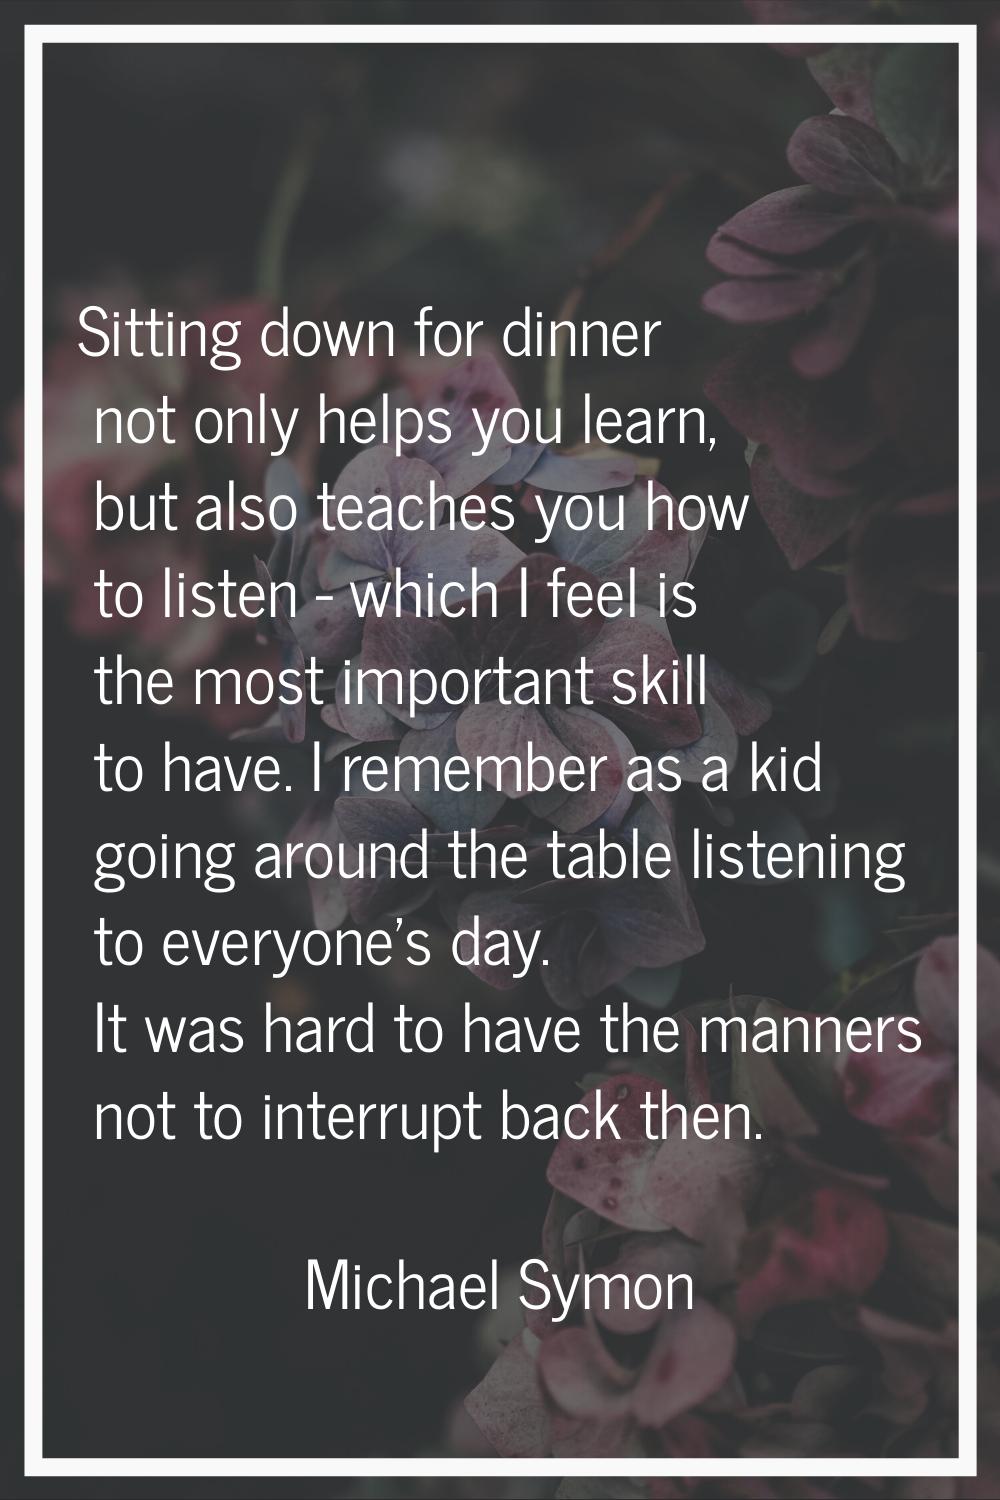 Sitting down for dinner not only helps you learn, but also teaches you how to listen - which I feel